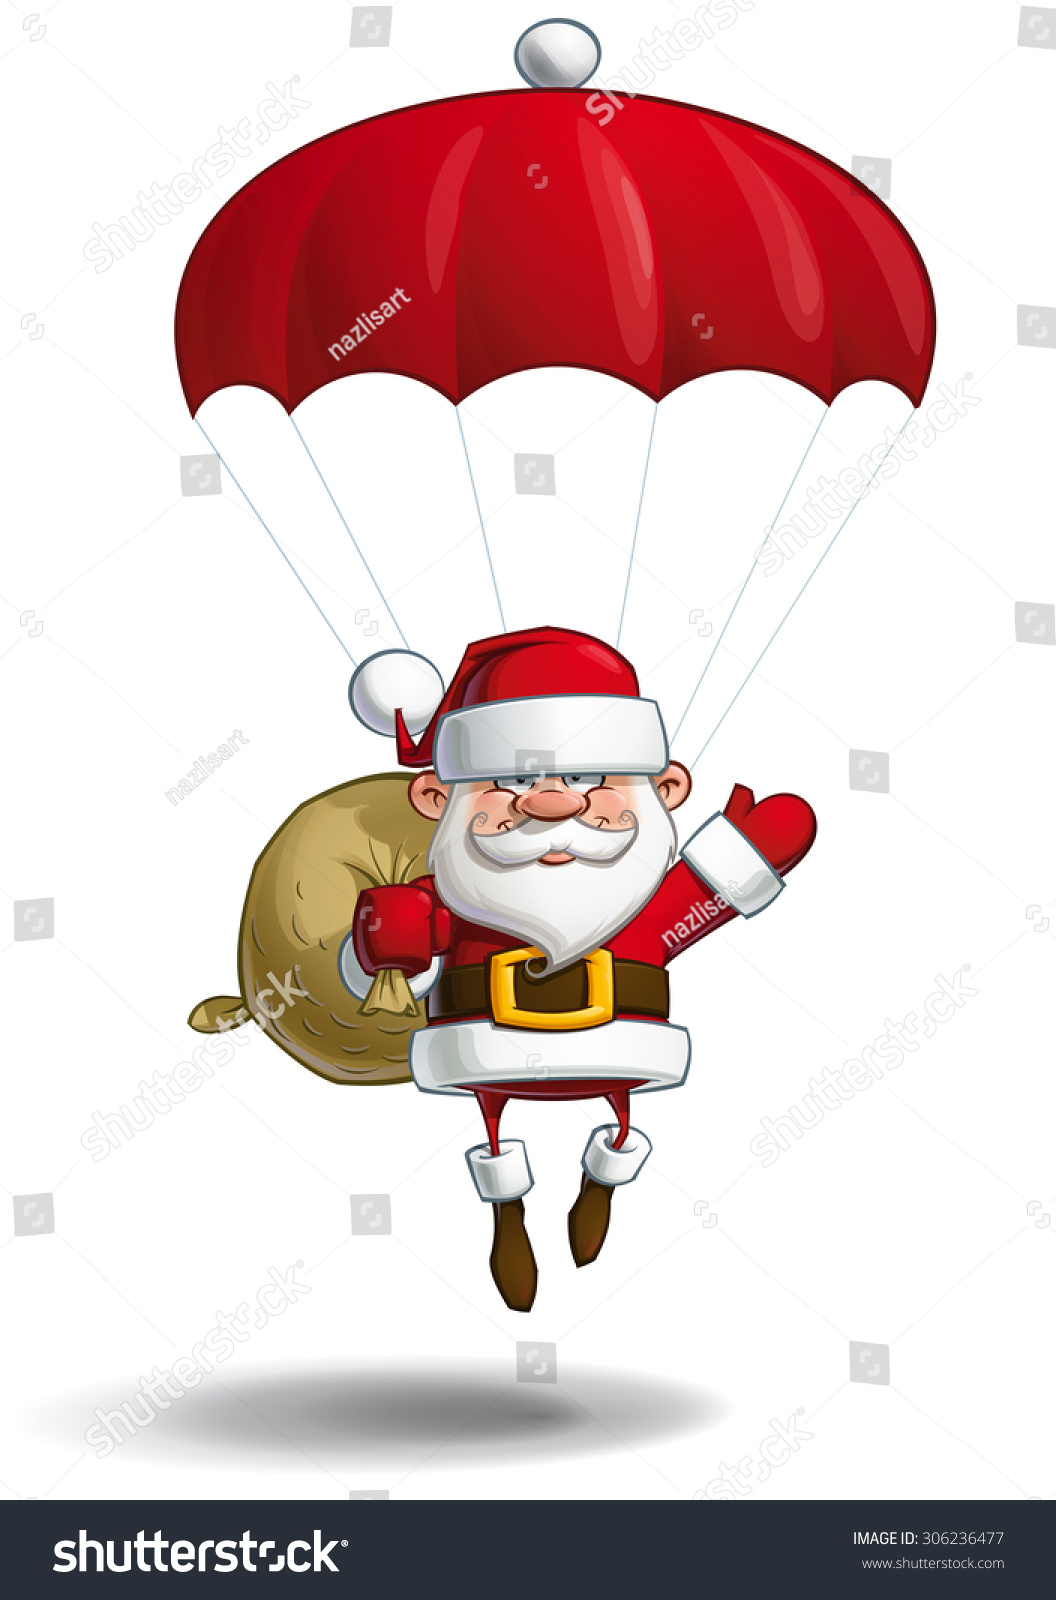 https://image.shutterstock.com/z/stock-vector-cartoon-vector-illustration-of-a-happy-santa-claus-falling-with-a-parachute-holding-a-gift-sack-306236477.jpg